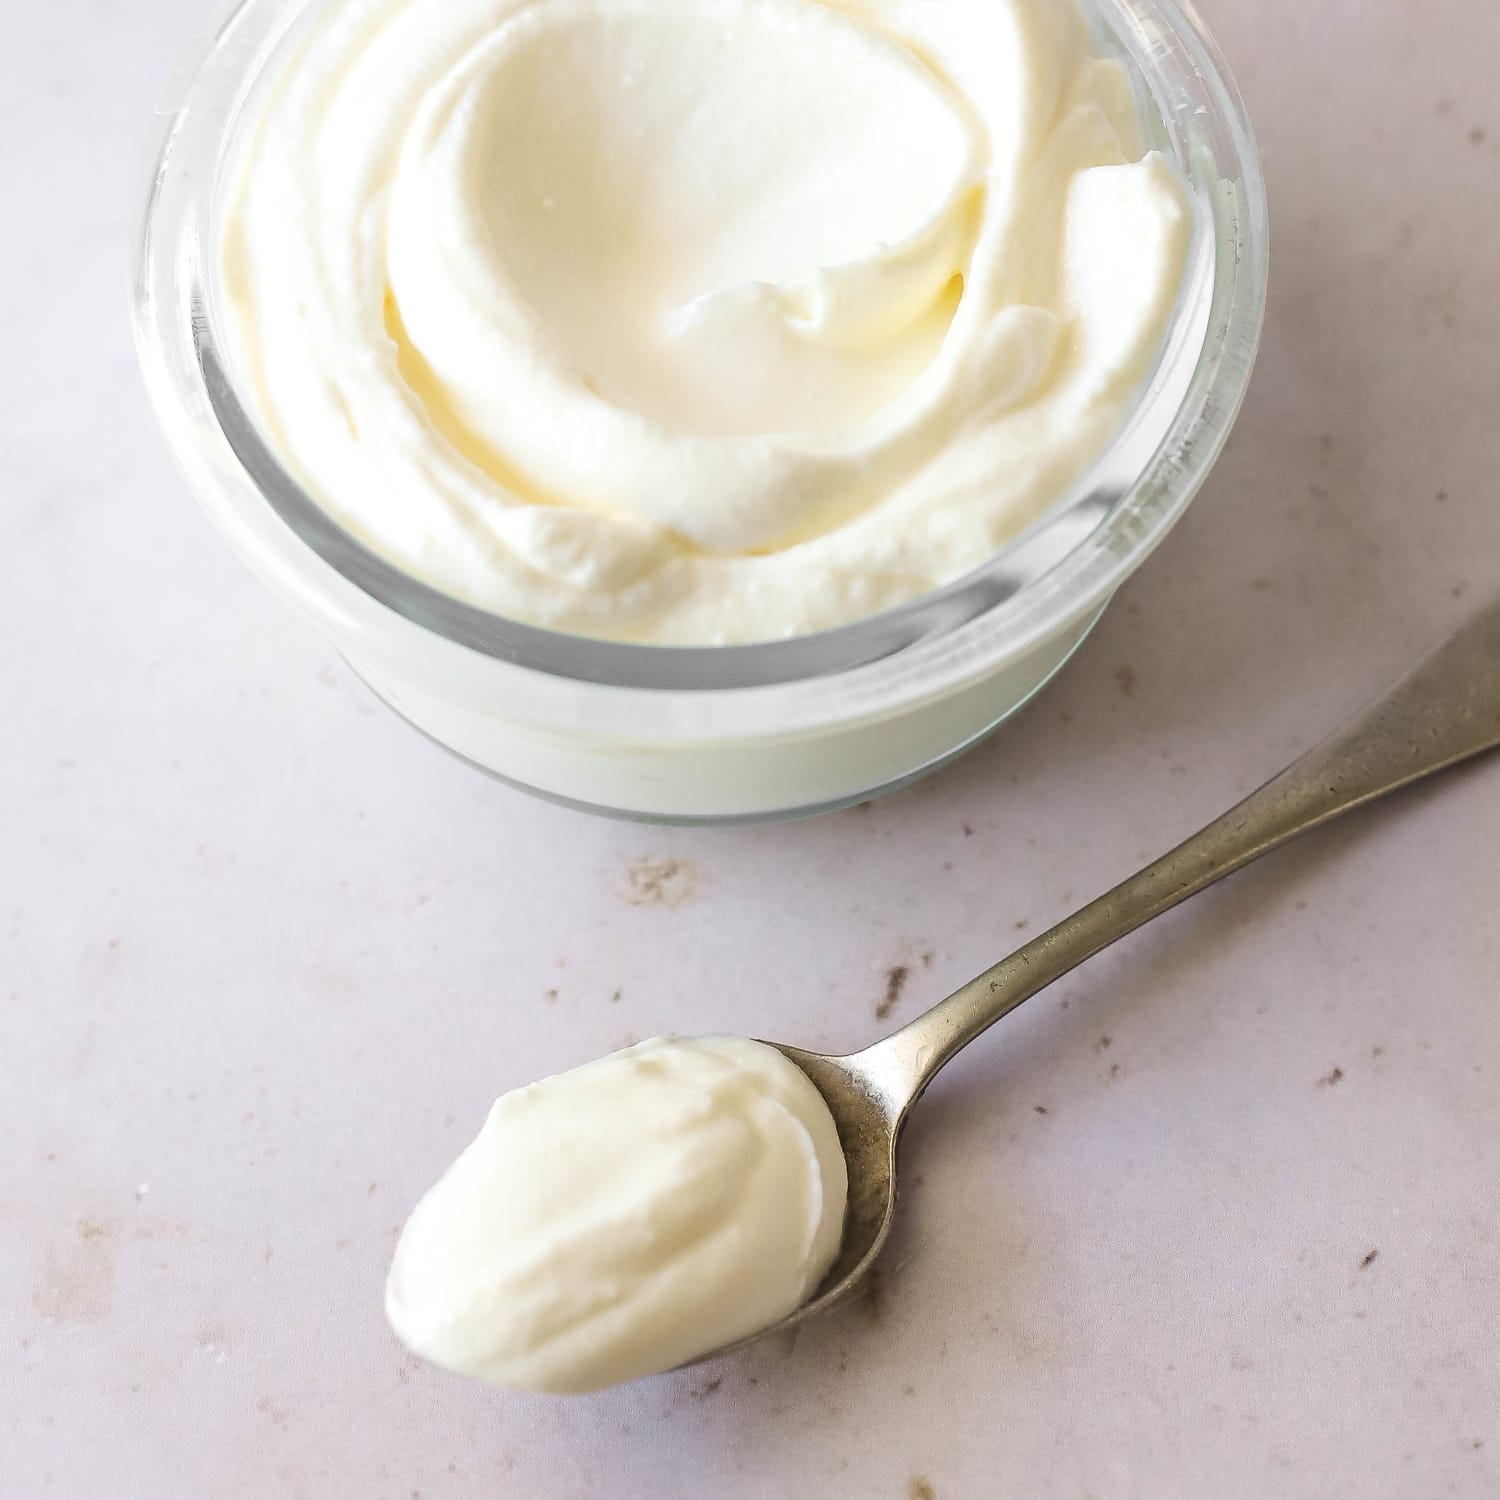 How to Make Sour Cream (Easy Recipe Using 2 Ingredients)